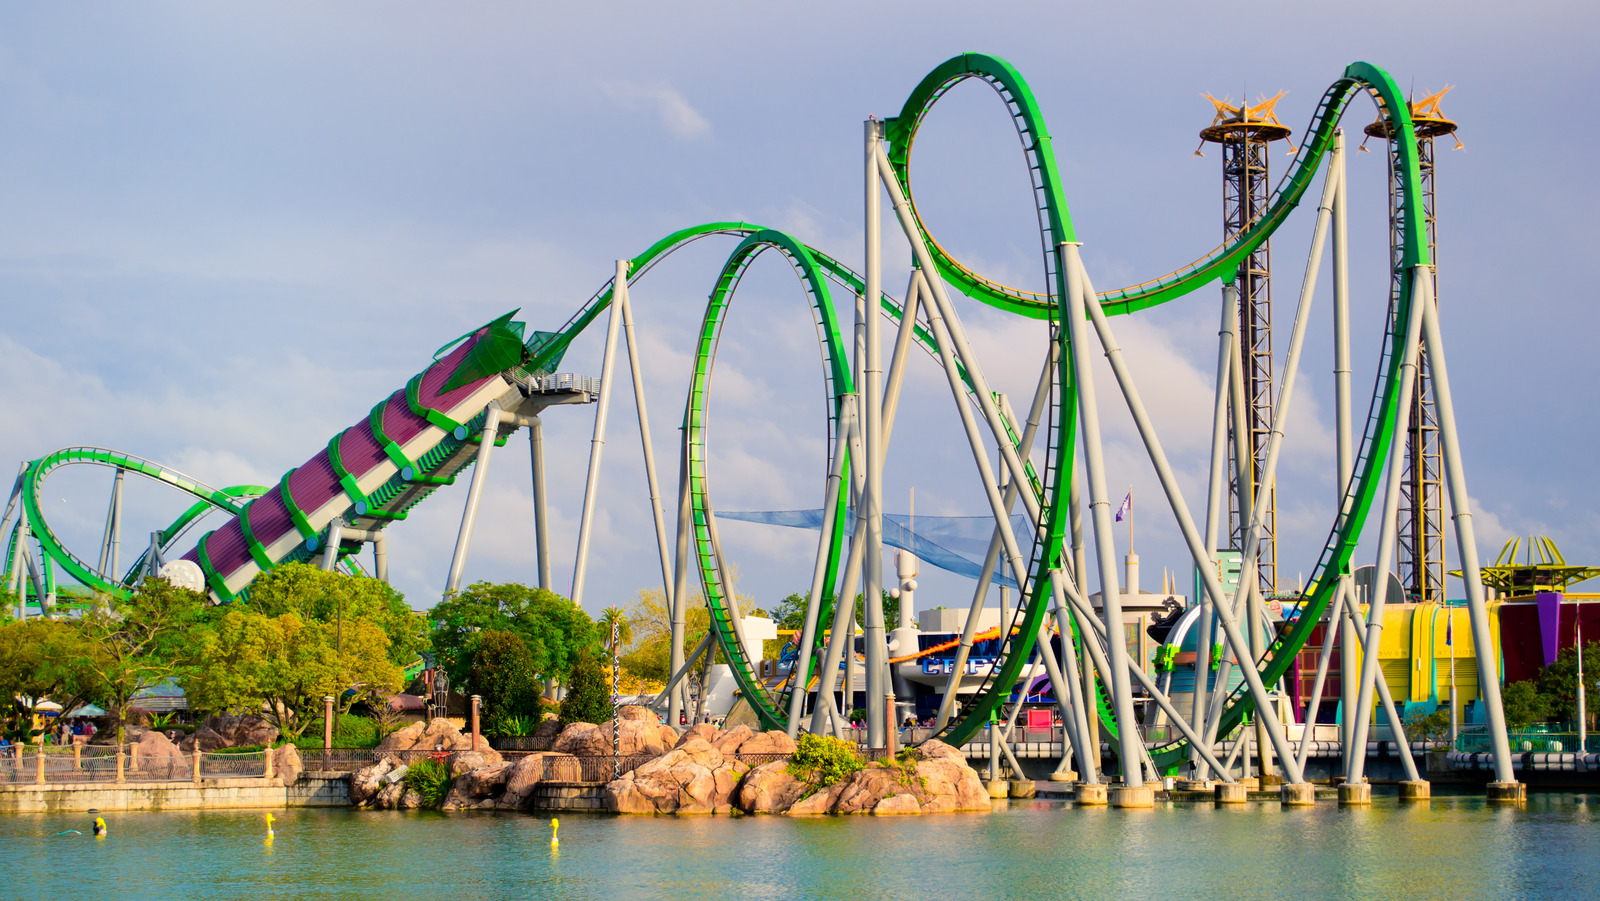 Universal's Islands of Adventure Fact Sheet - The Magic For Less